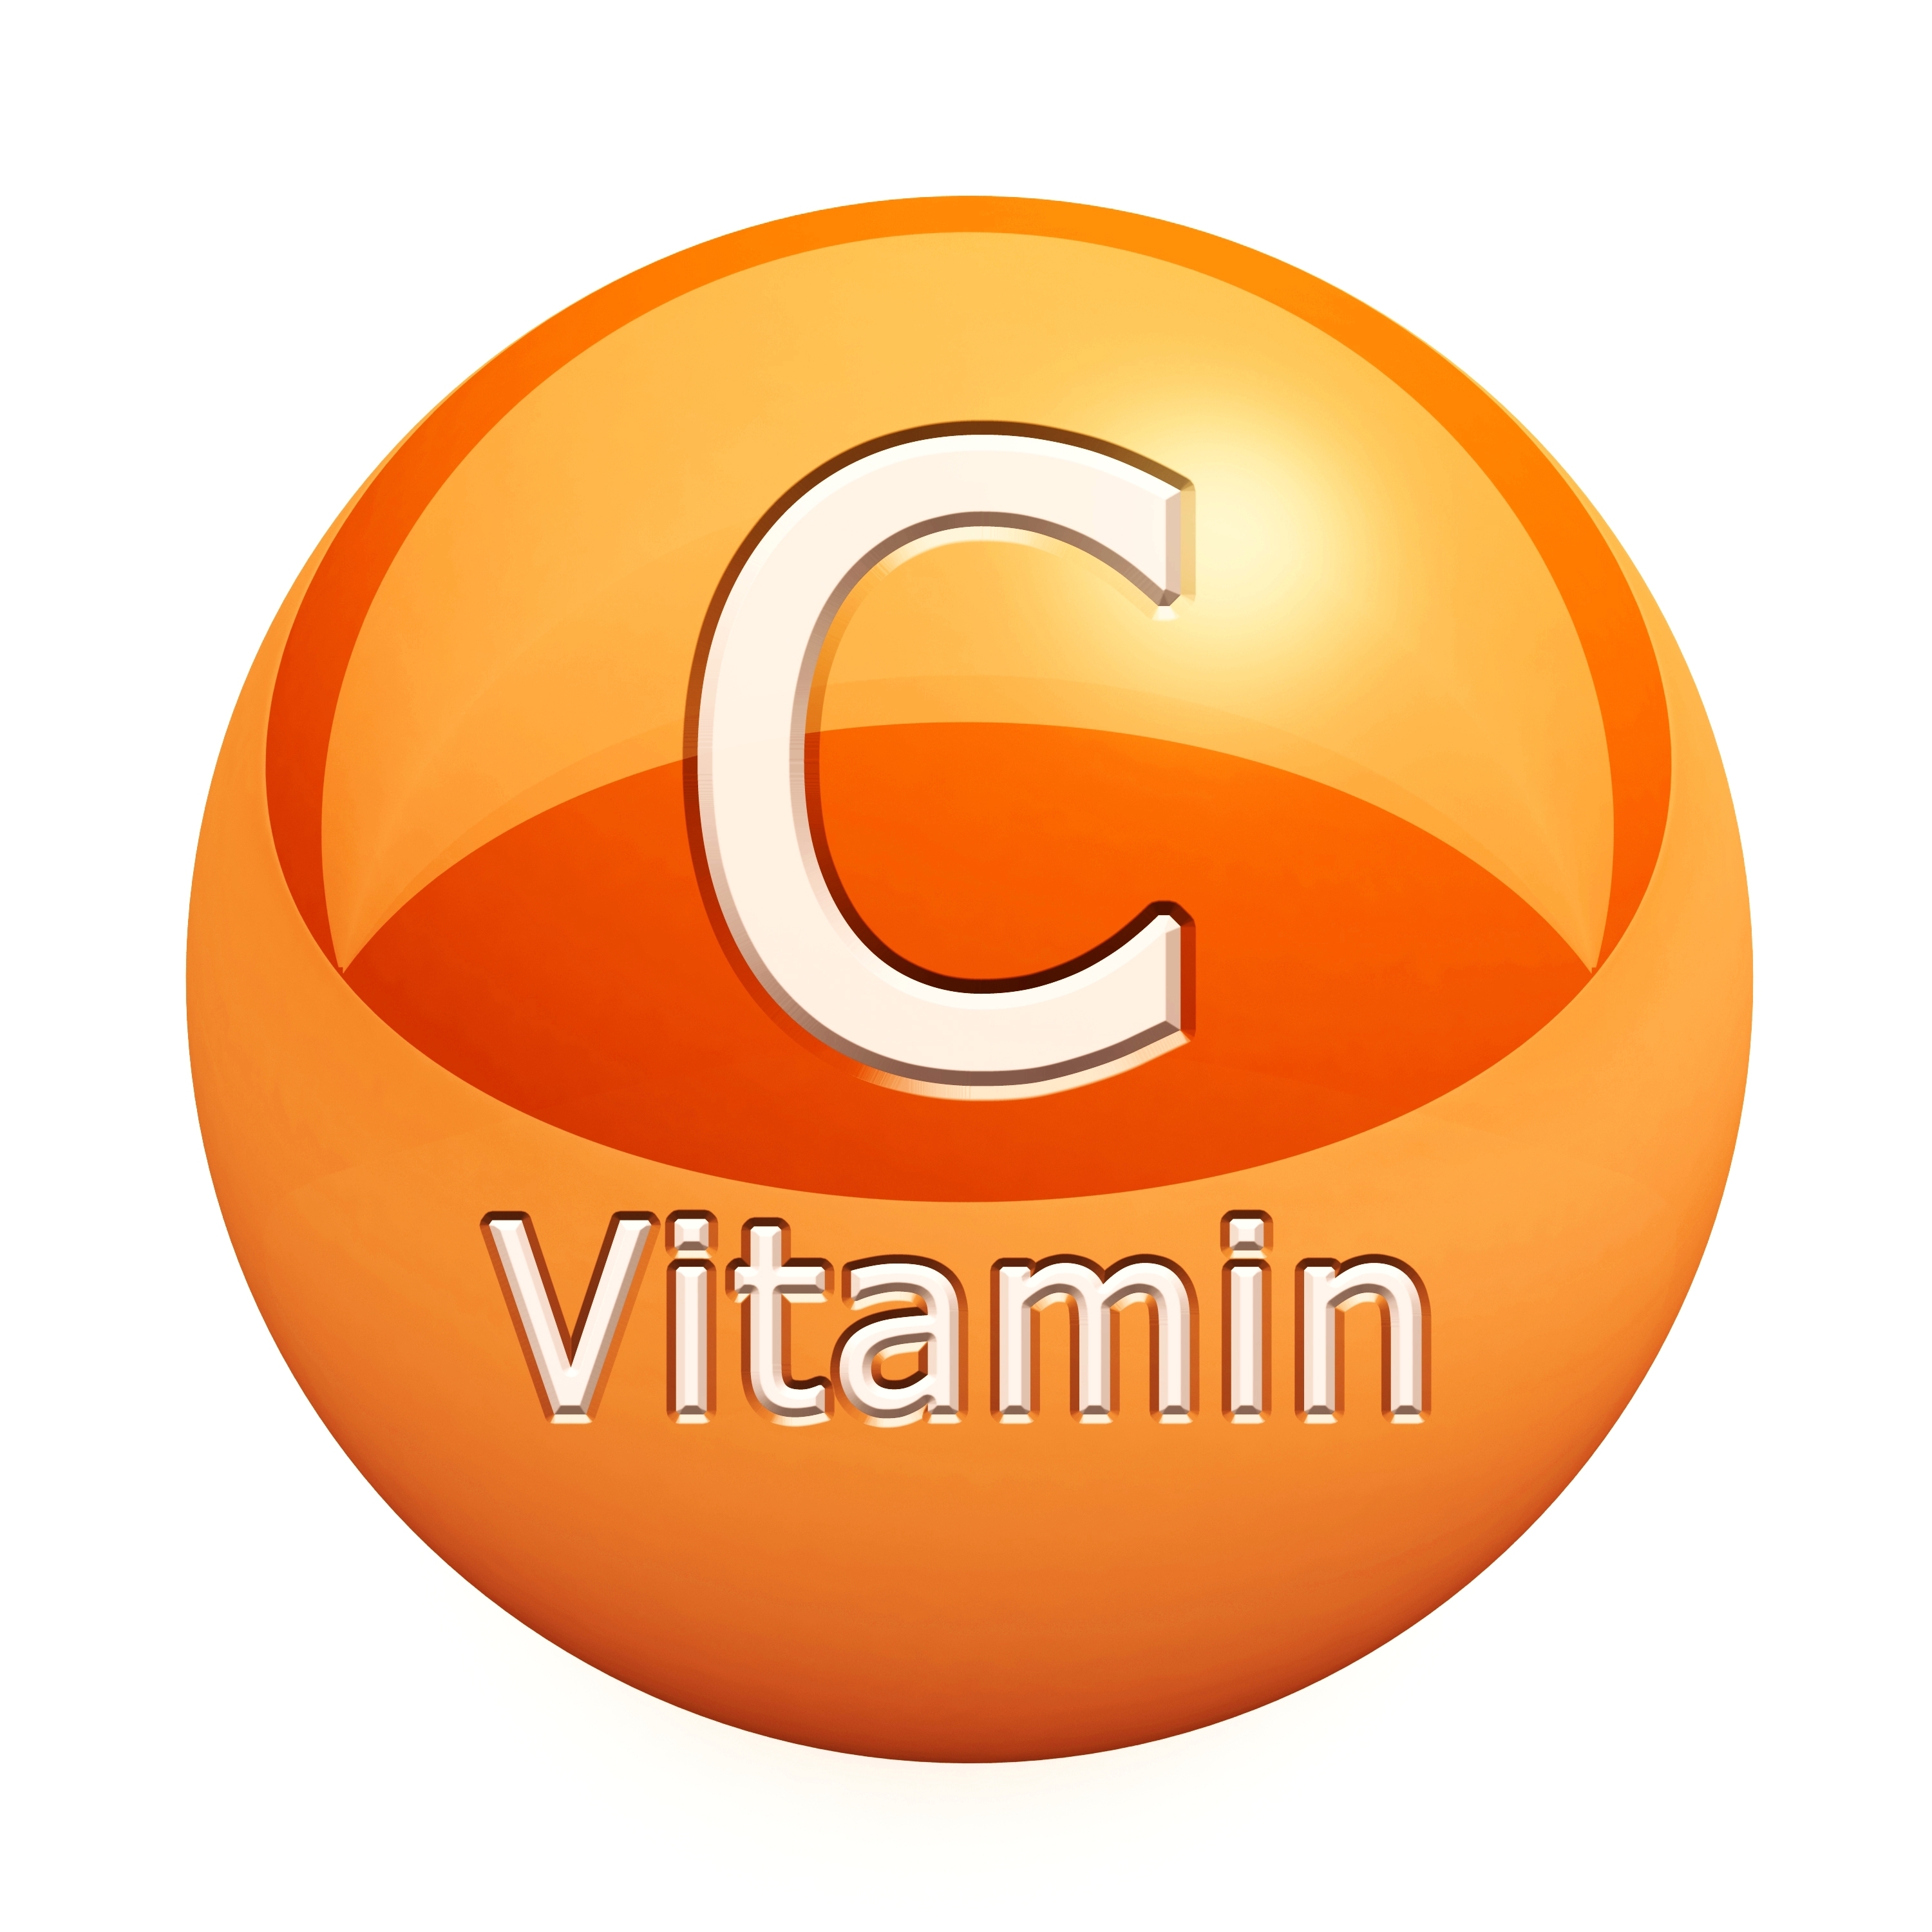 Vitamin C: What’s In It for Me?